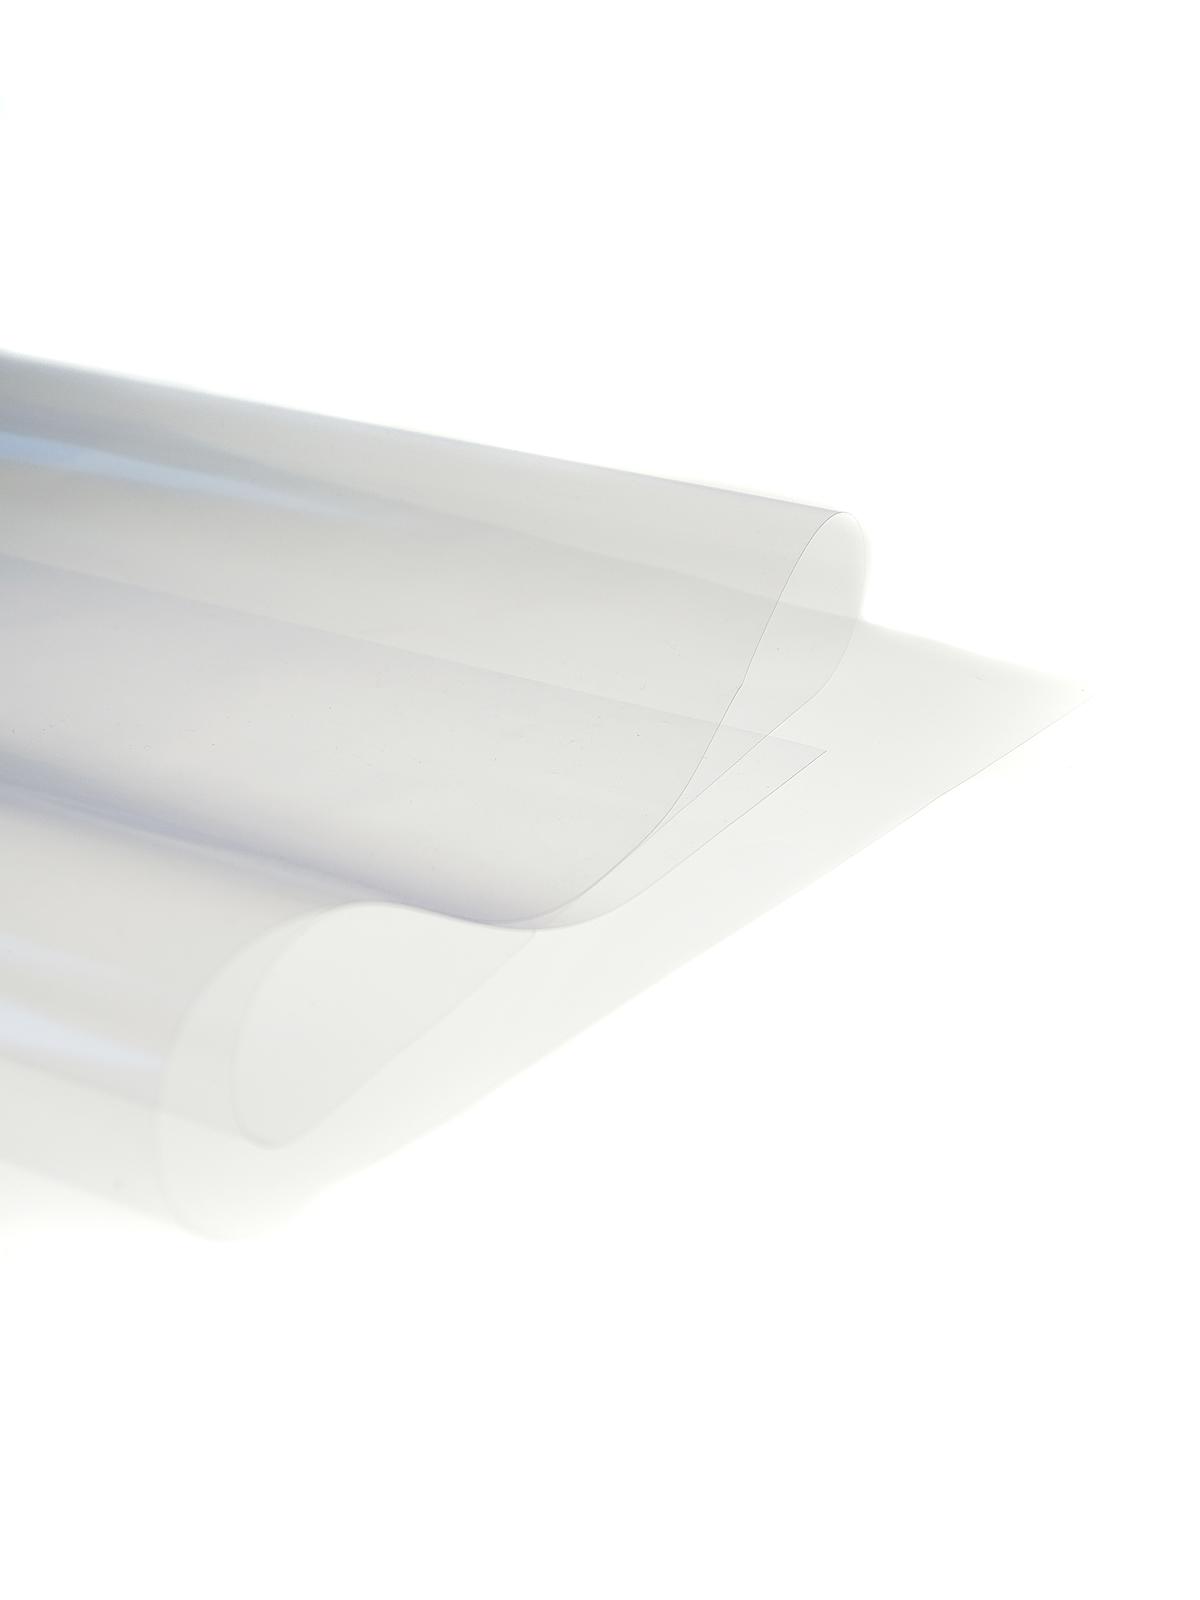 Clear-Lay Plastic Film 0.010 25 In. X 40 In. Sheet